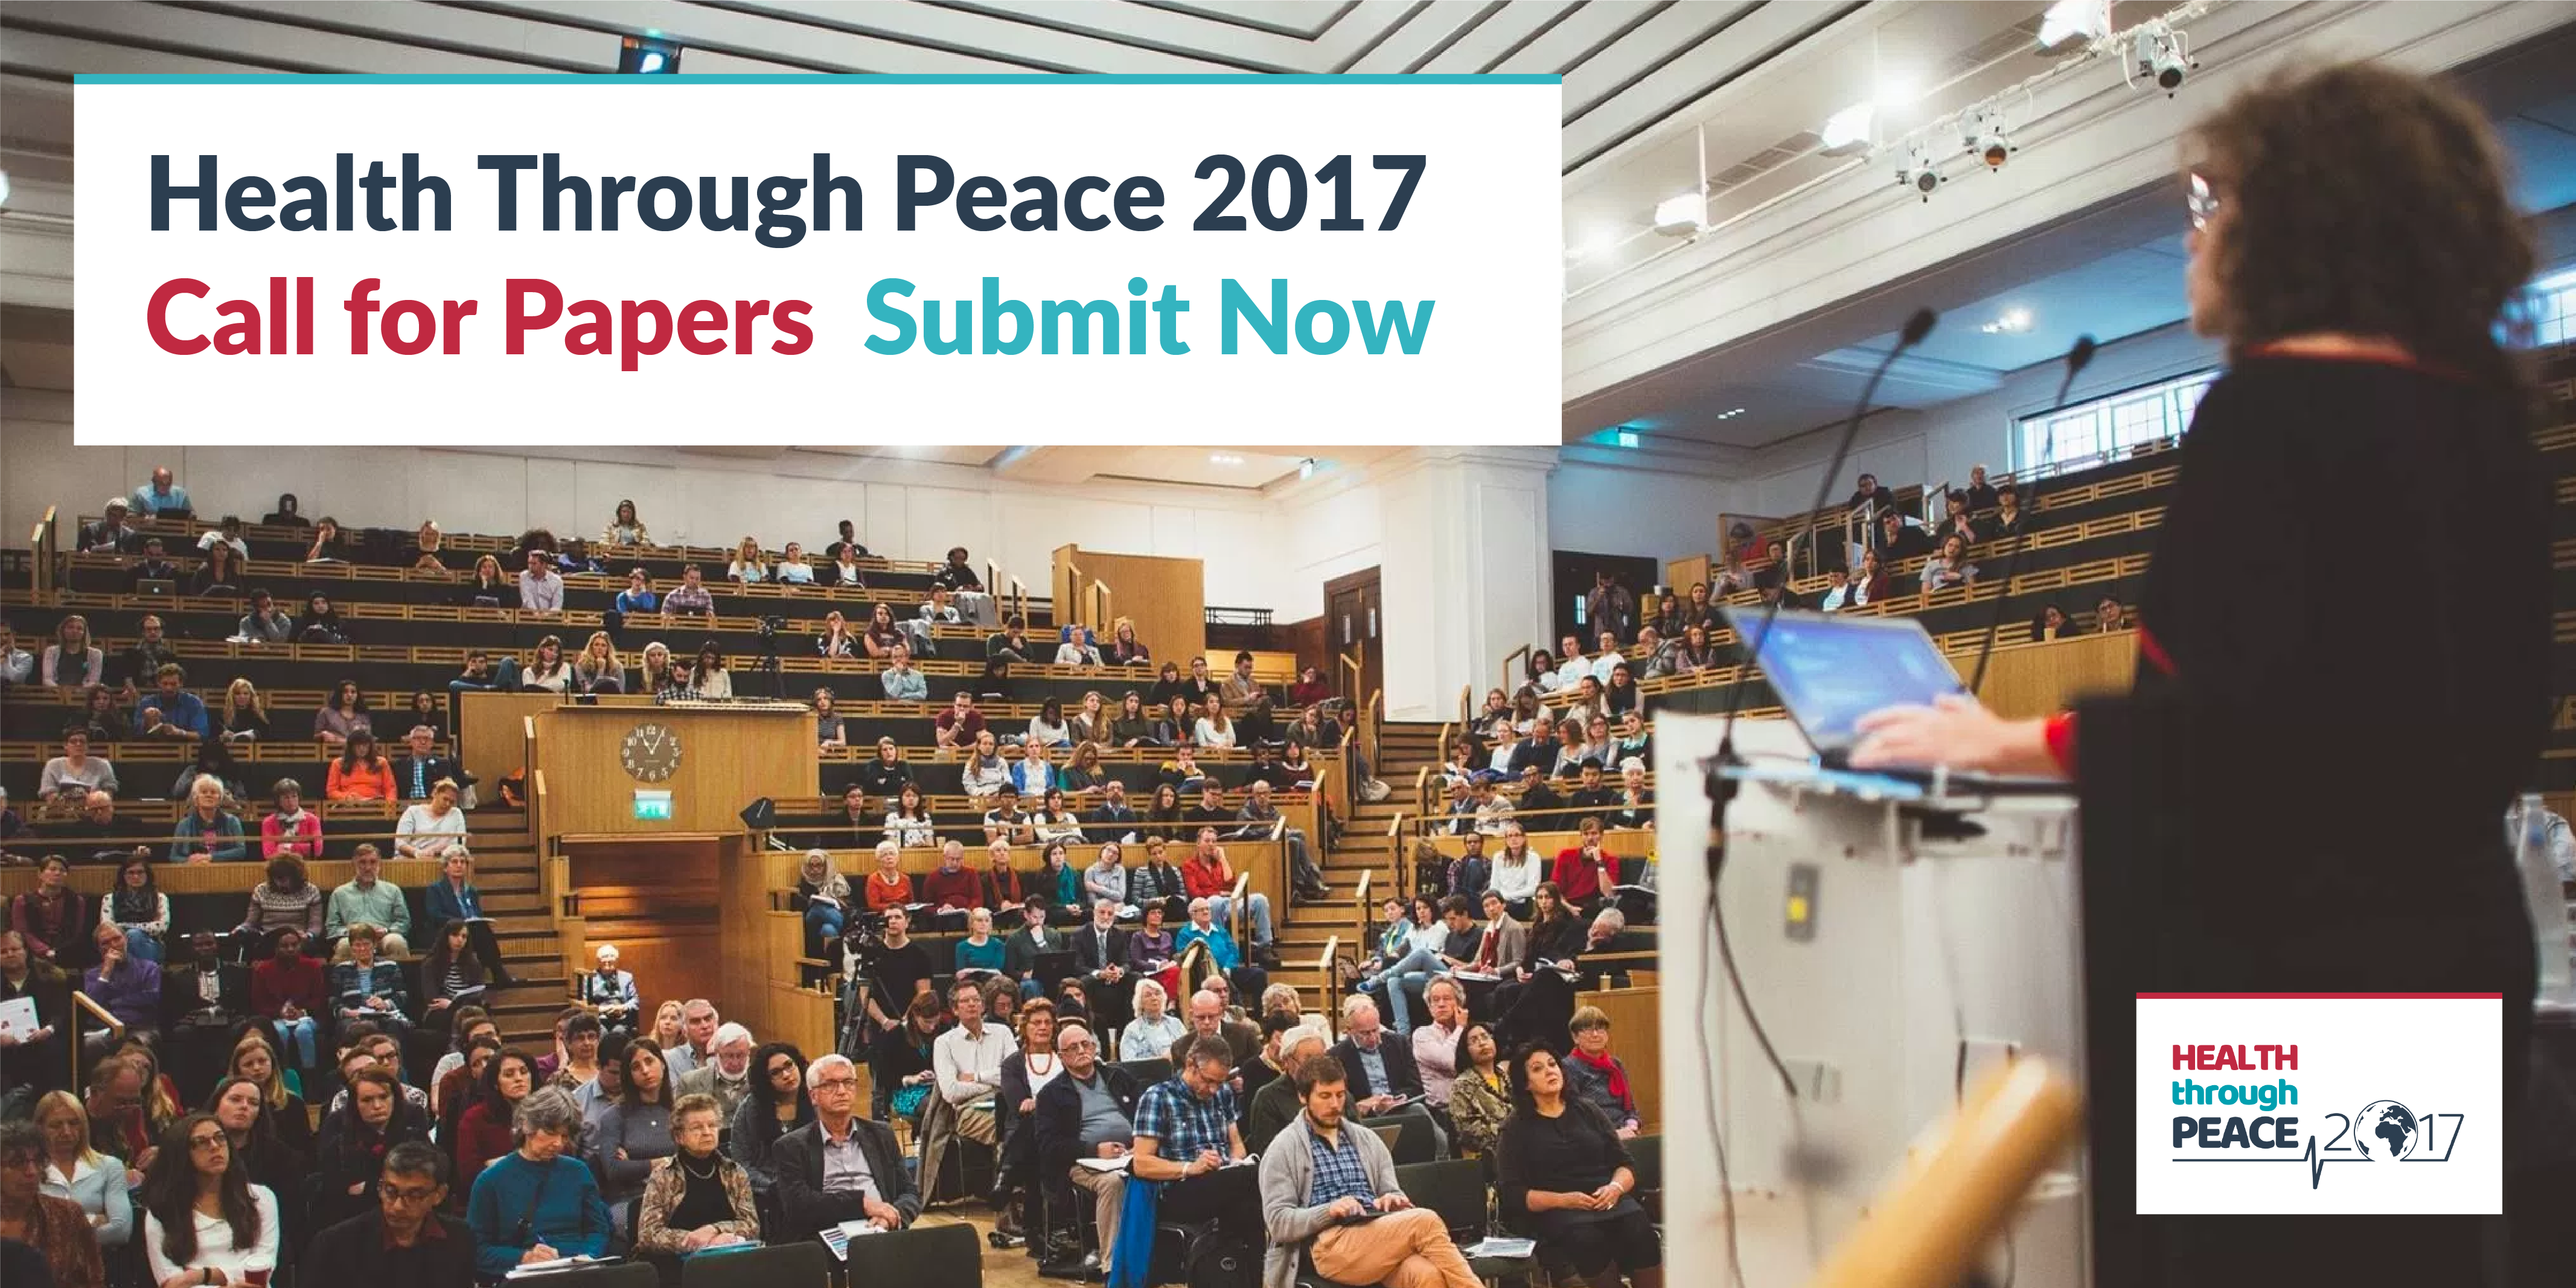 Call for Papers – Opportunity to Speak at Health Through Peace 2017